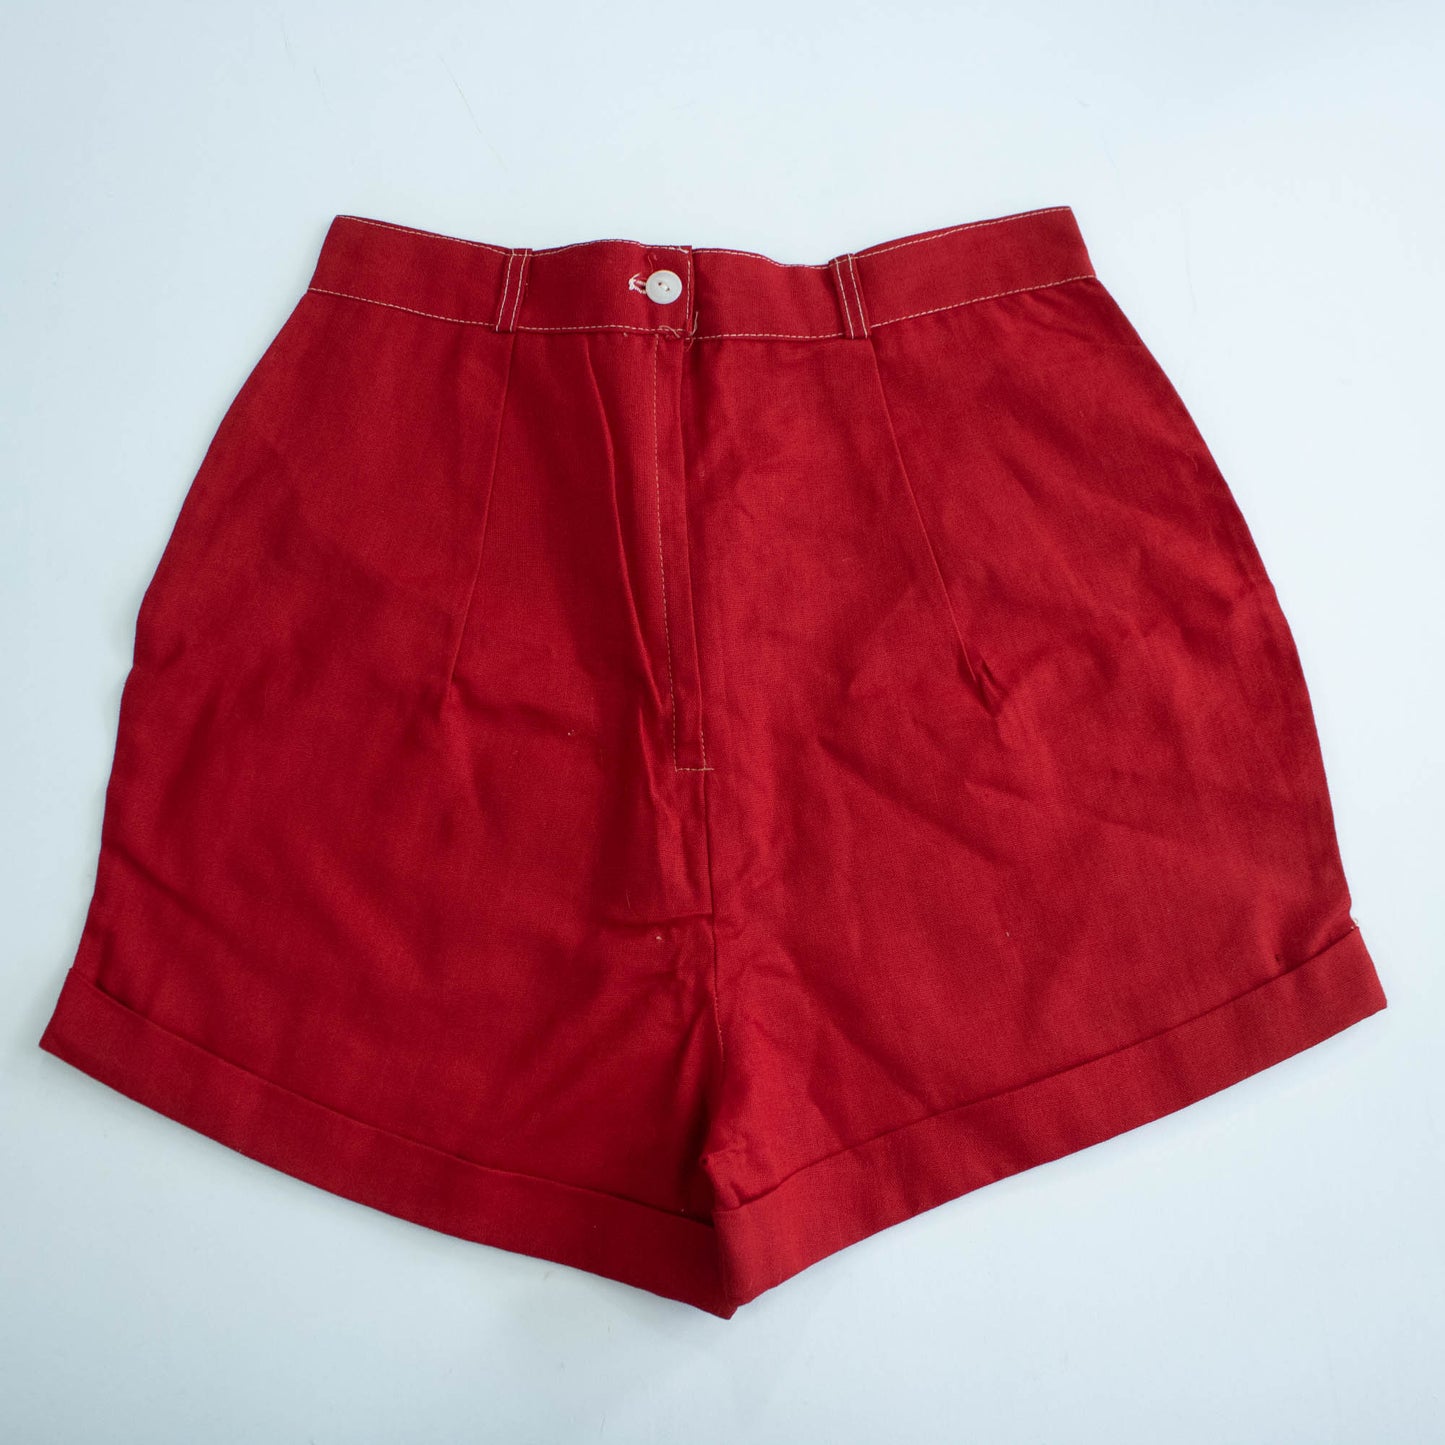 Deadstock 50s Red Cotton Shorts 30